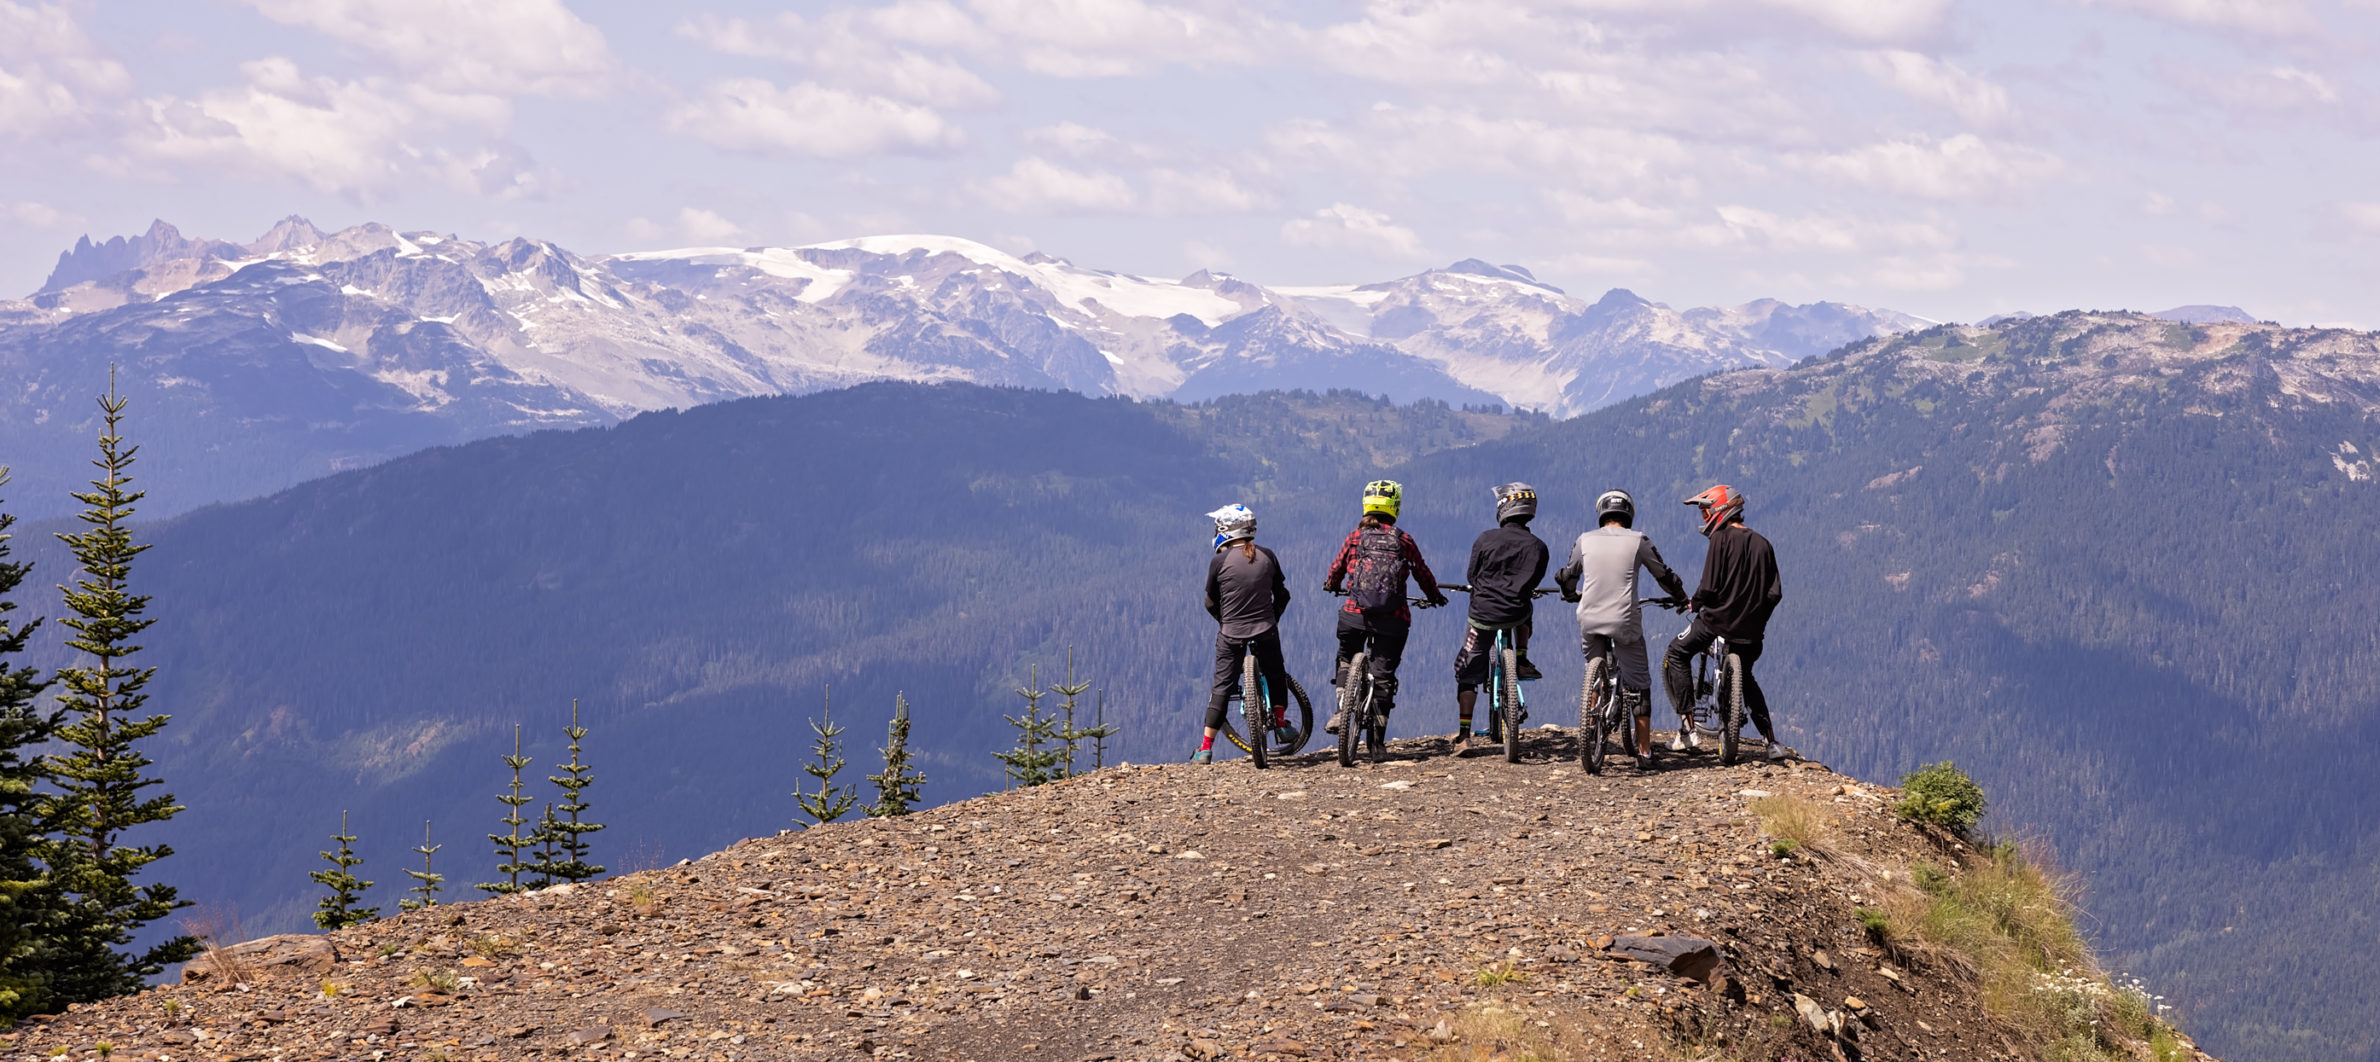 A group of young people on mountain bikes pause at a viewpoint and look out over a mountain vista. Their backs are to the camera and it is a beautiful summer day